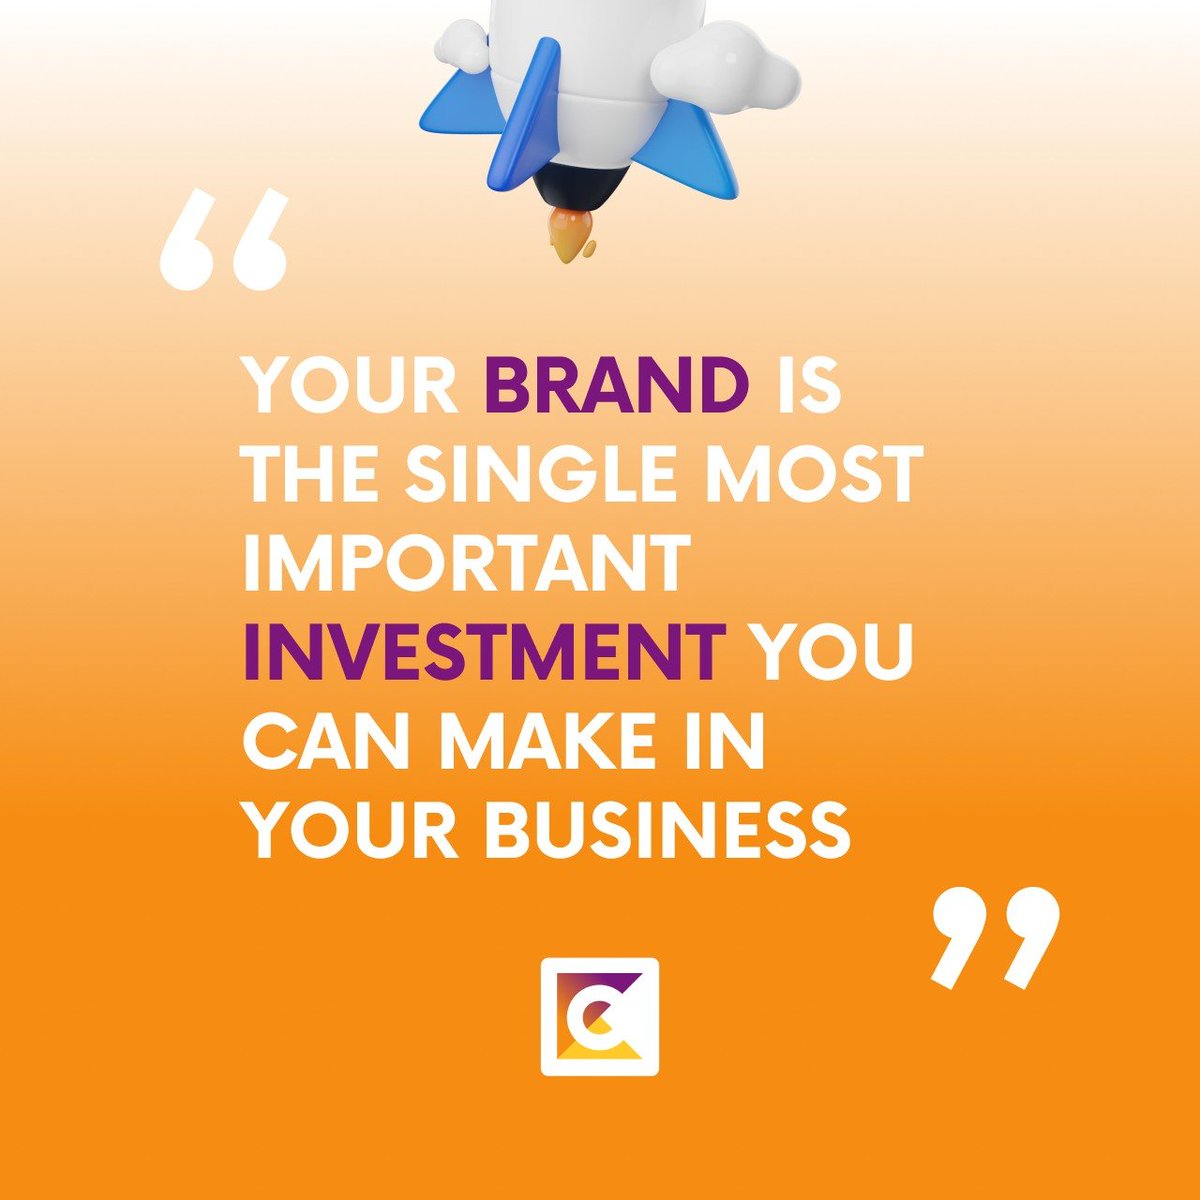 Your brand is more than just a logo, it's what sets you apart from the rest! Keep in mind that investing in your brand is investing in your future.

Agree?

#DigitalMarketing #SocialMediaMarketing #OnlineBranding #BrandingStrategy